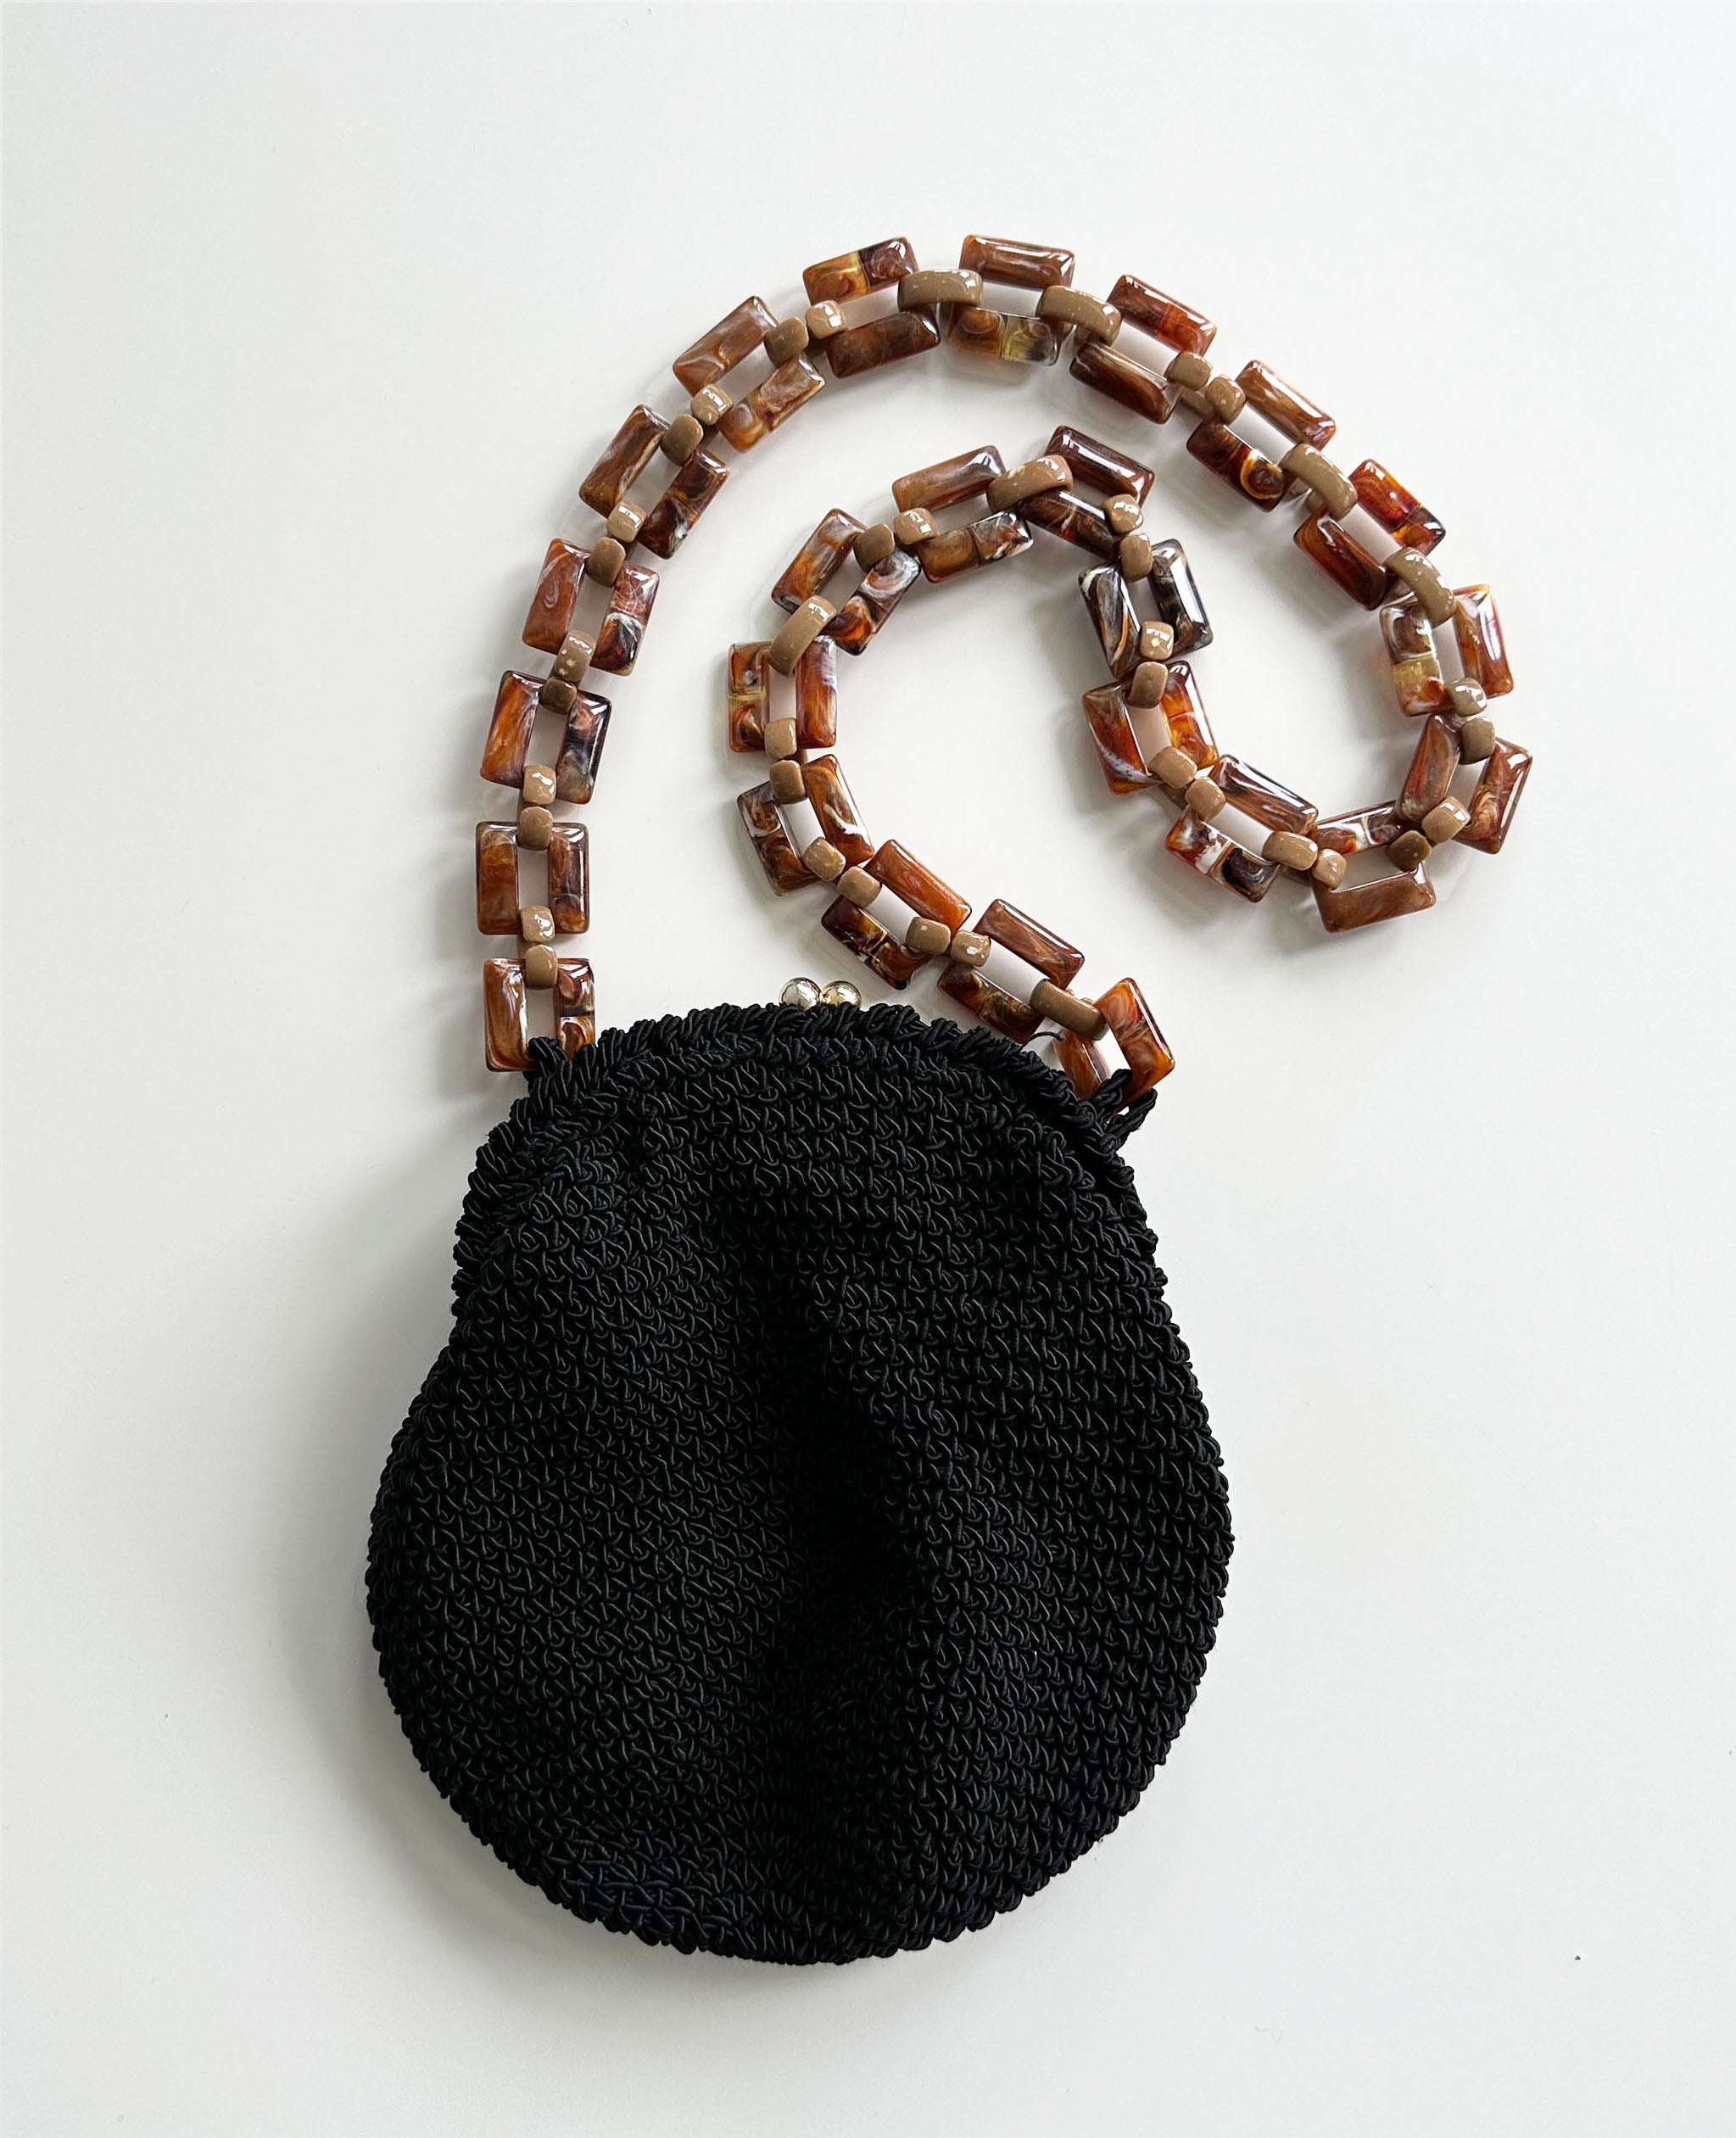 Crochet Bag With Marbled Chain Strap